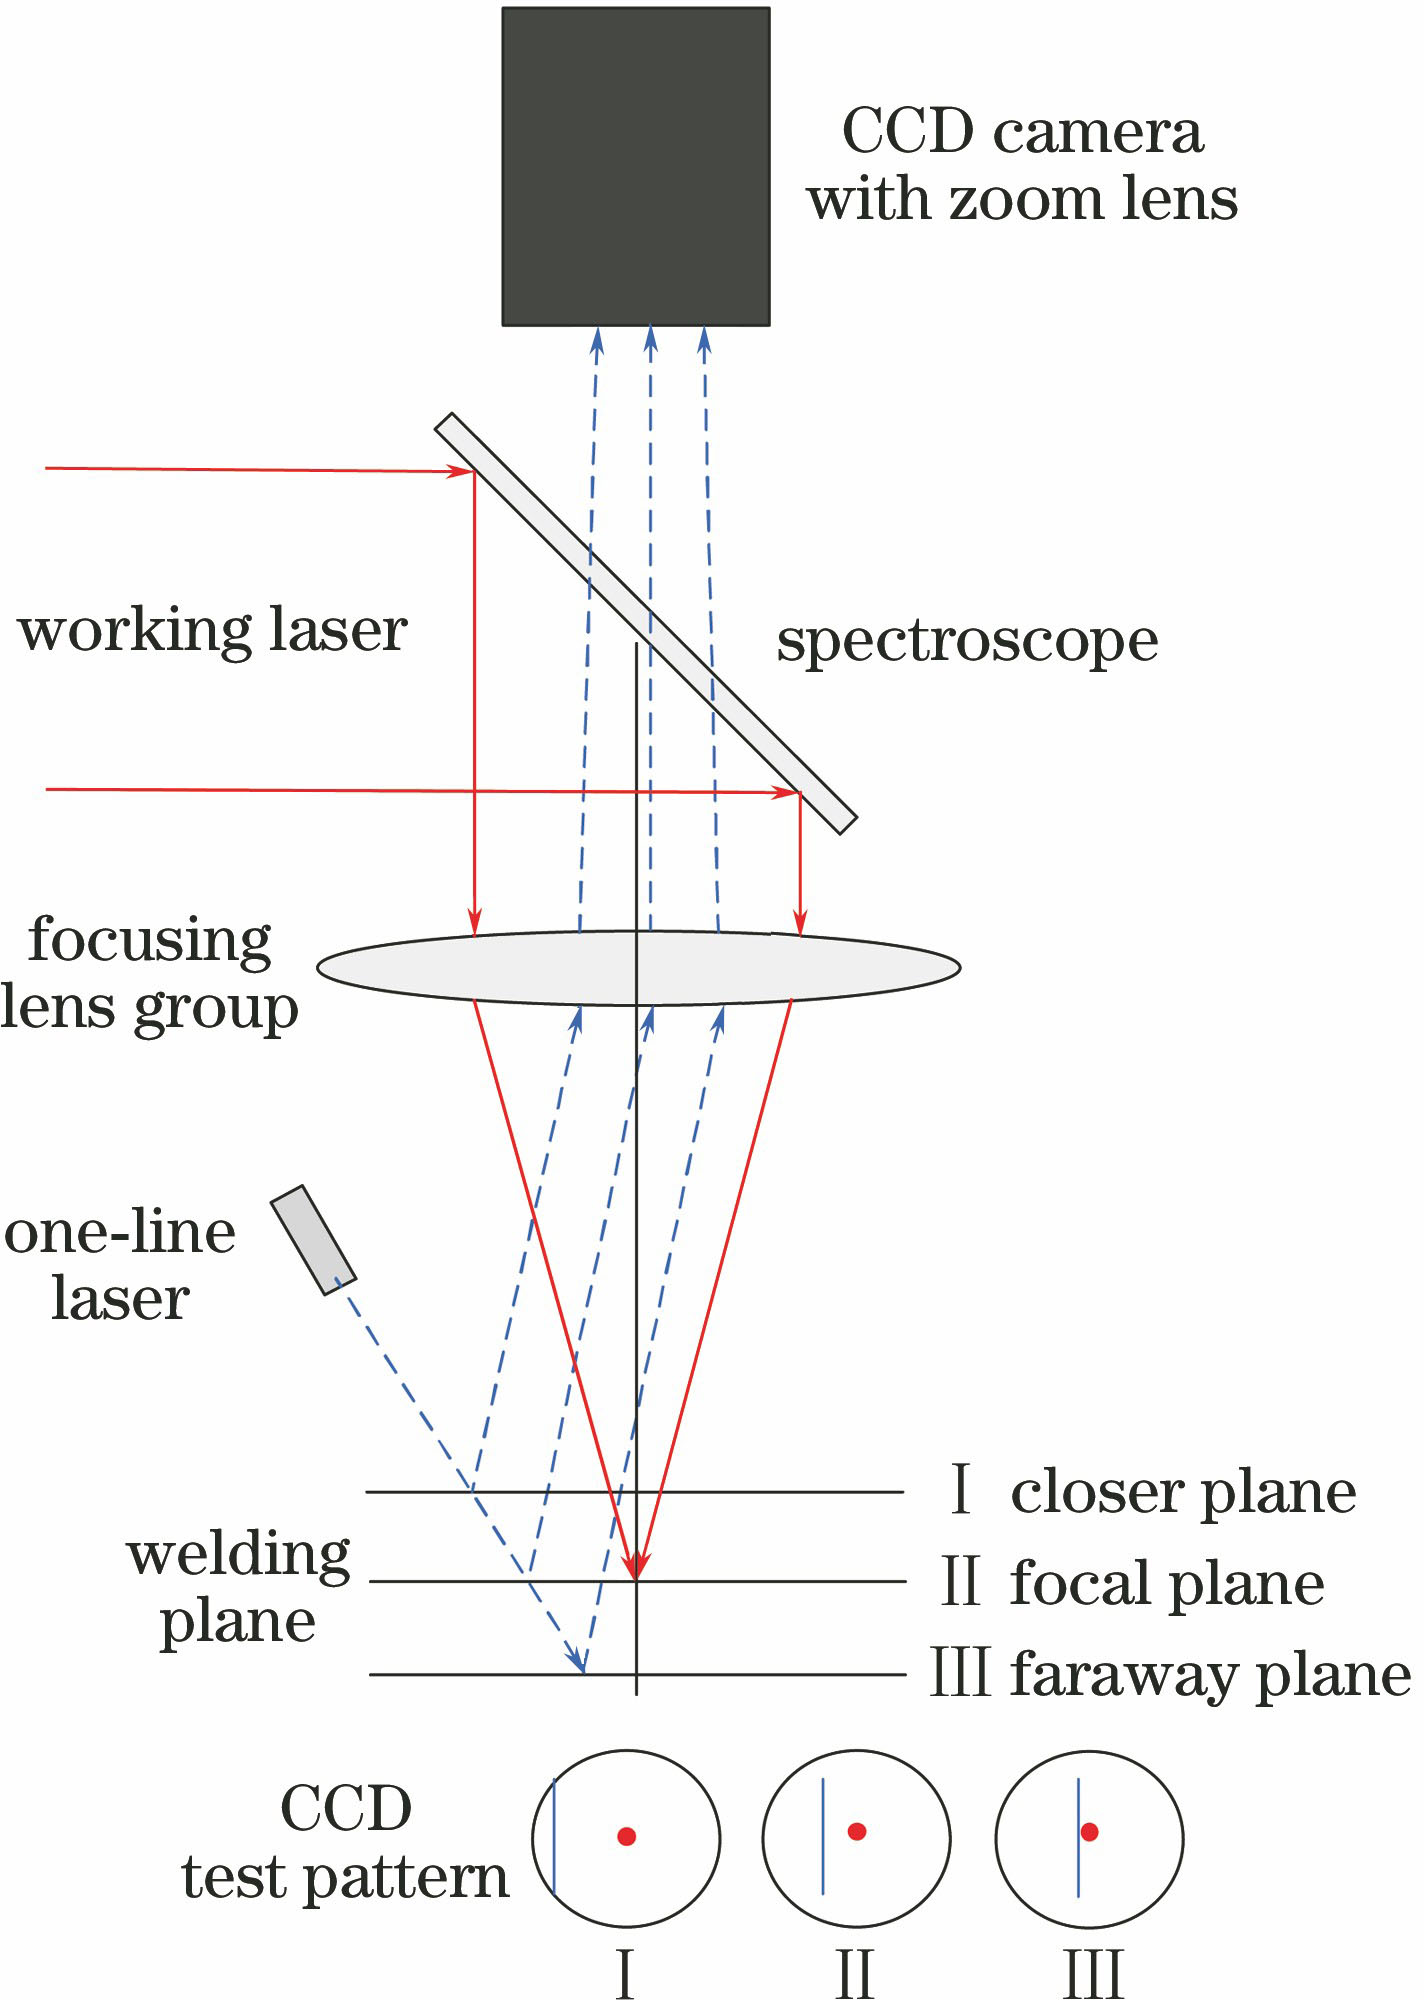 Sketch map for CCD image detection